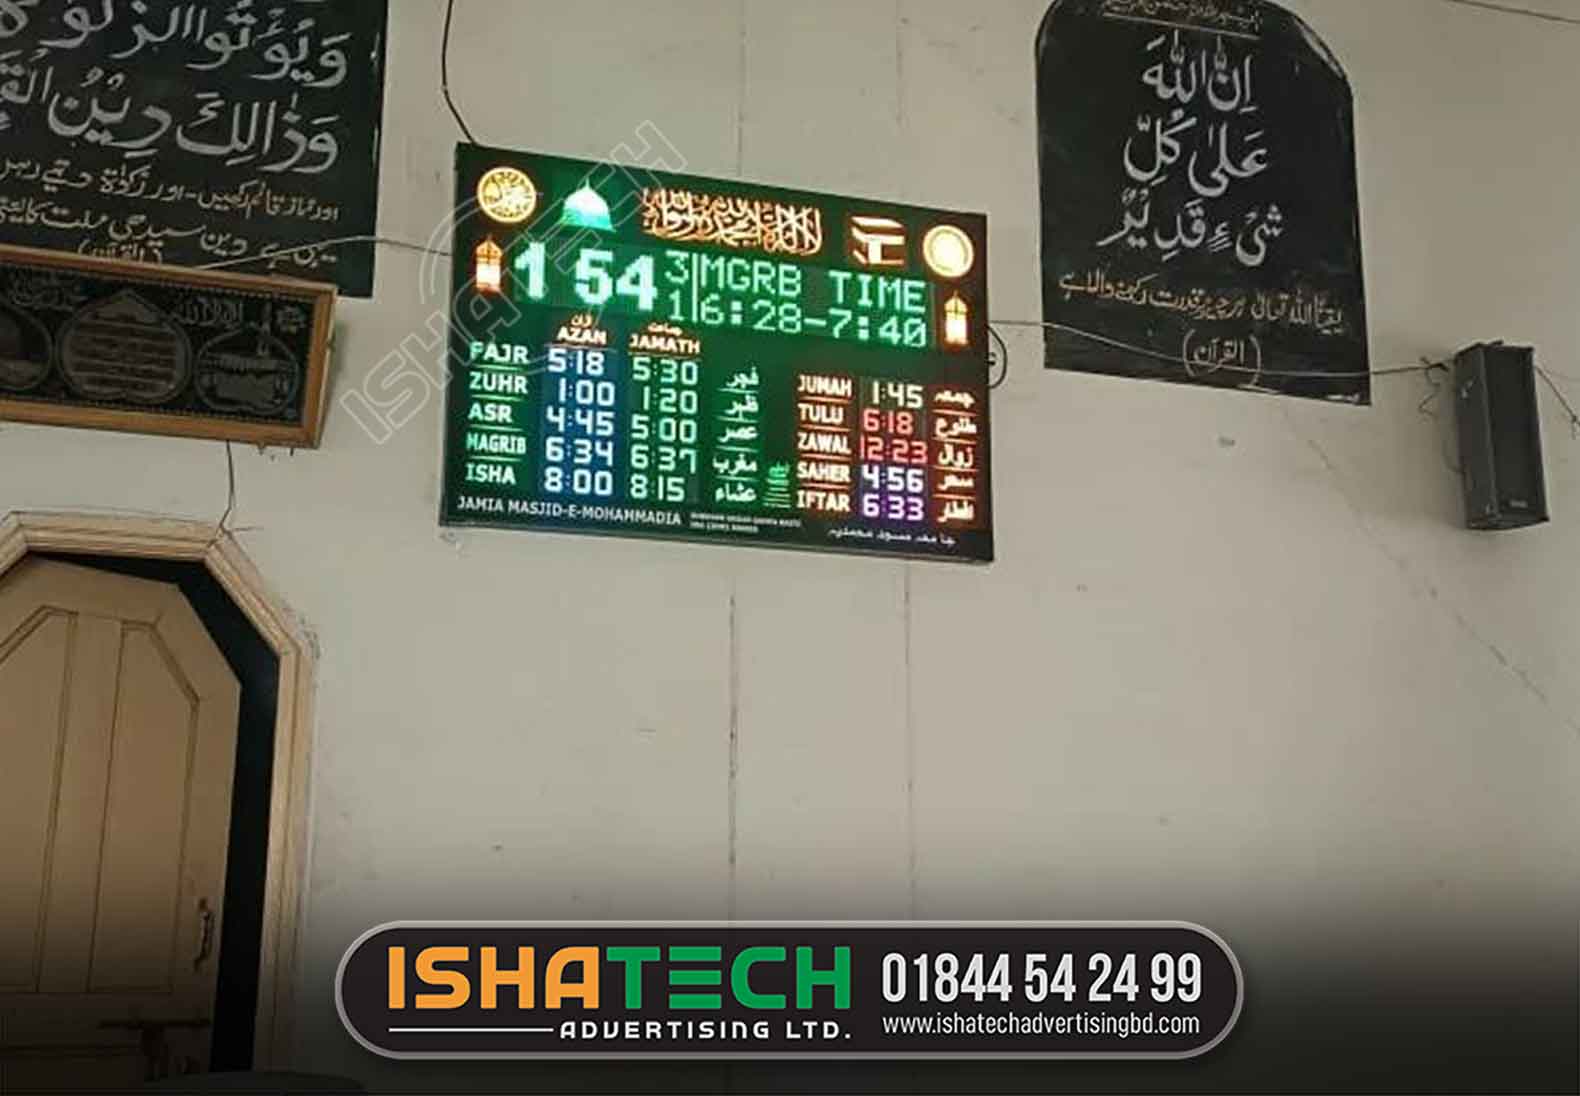 Islamic Mosque Azan Wall Clock 5 Prayer Time Table Digital Clock AC220V Remote Control Operate at lowest prices in Bangladesh. BDT 6,500.00